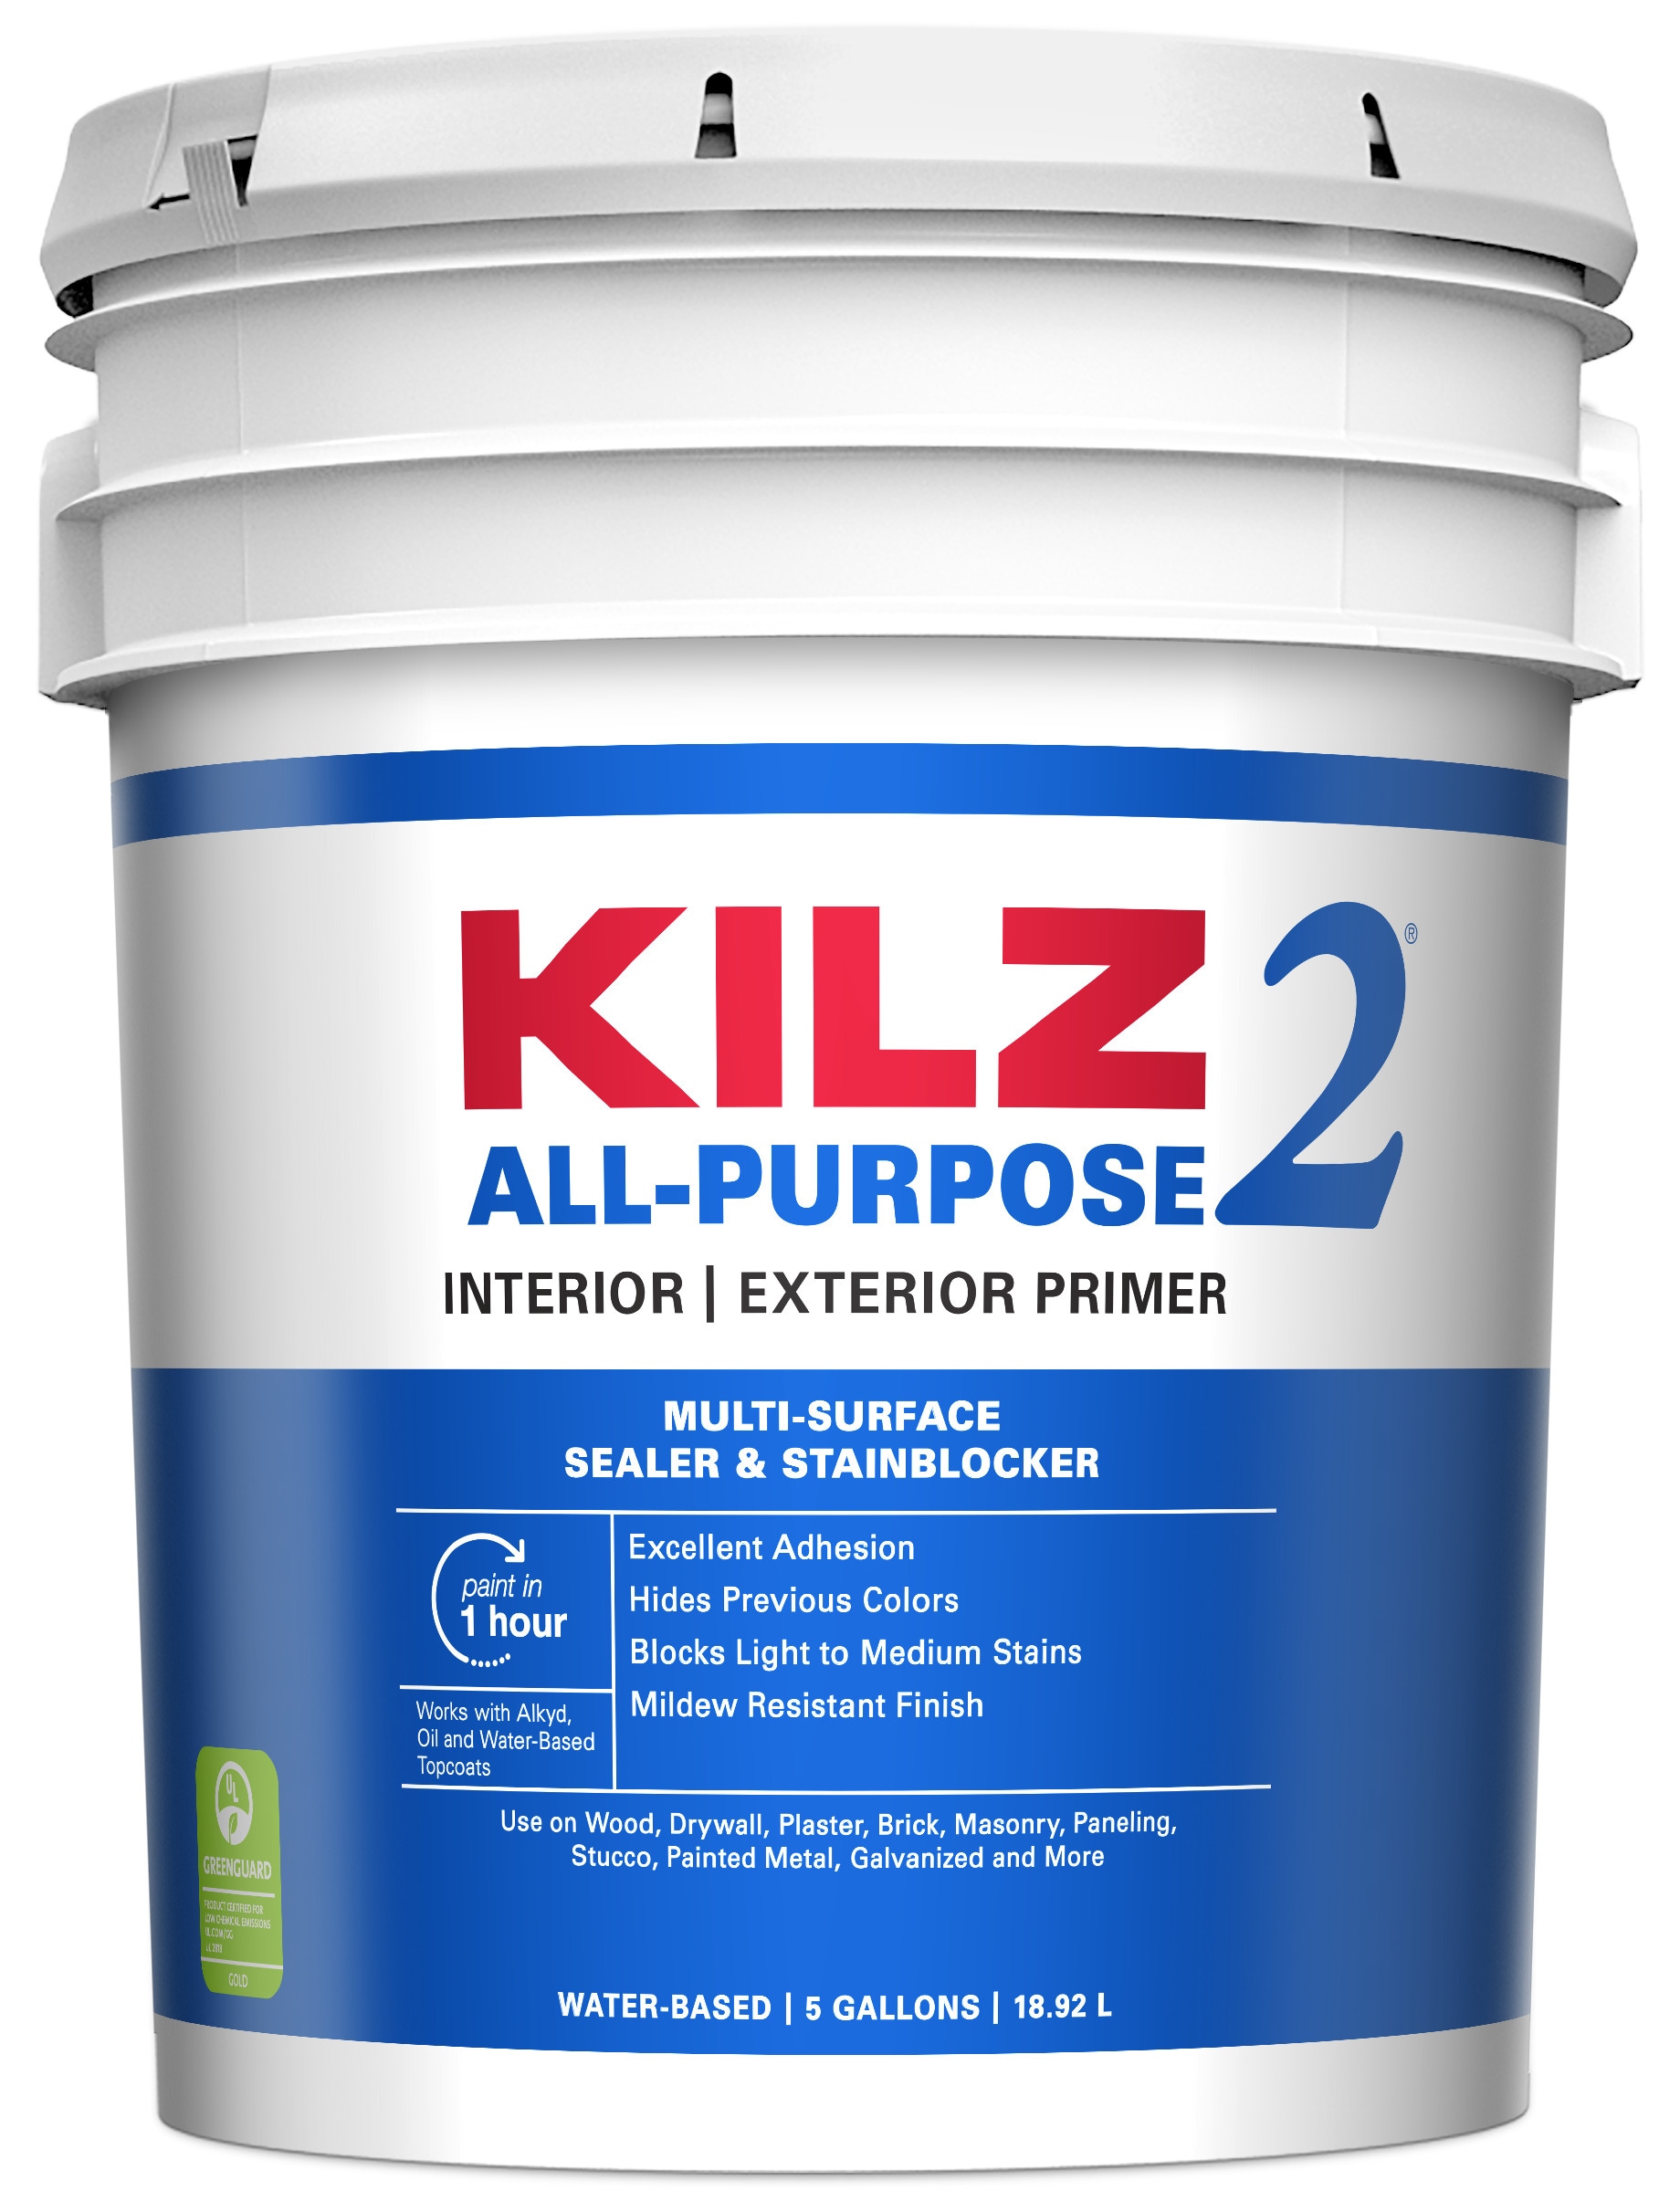 3.5 Gallon Metal Pail with Rust Inhibitor, Non-UN Rated, 28 Gauge